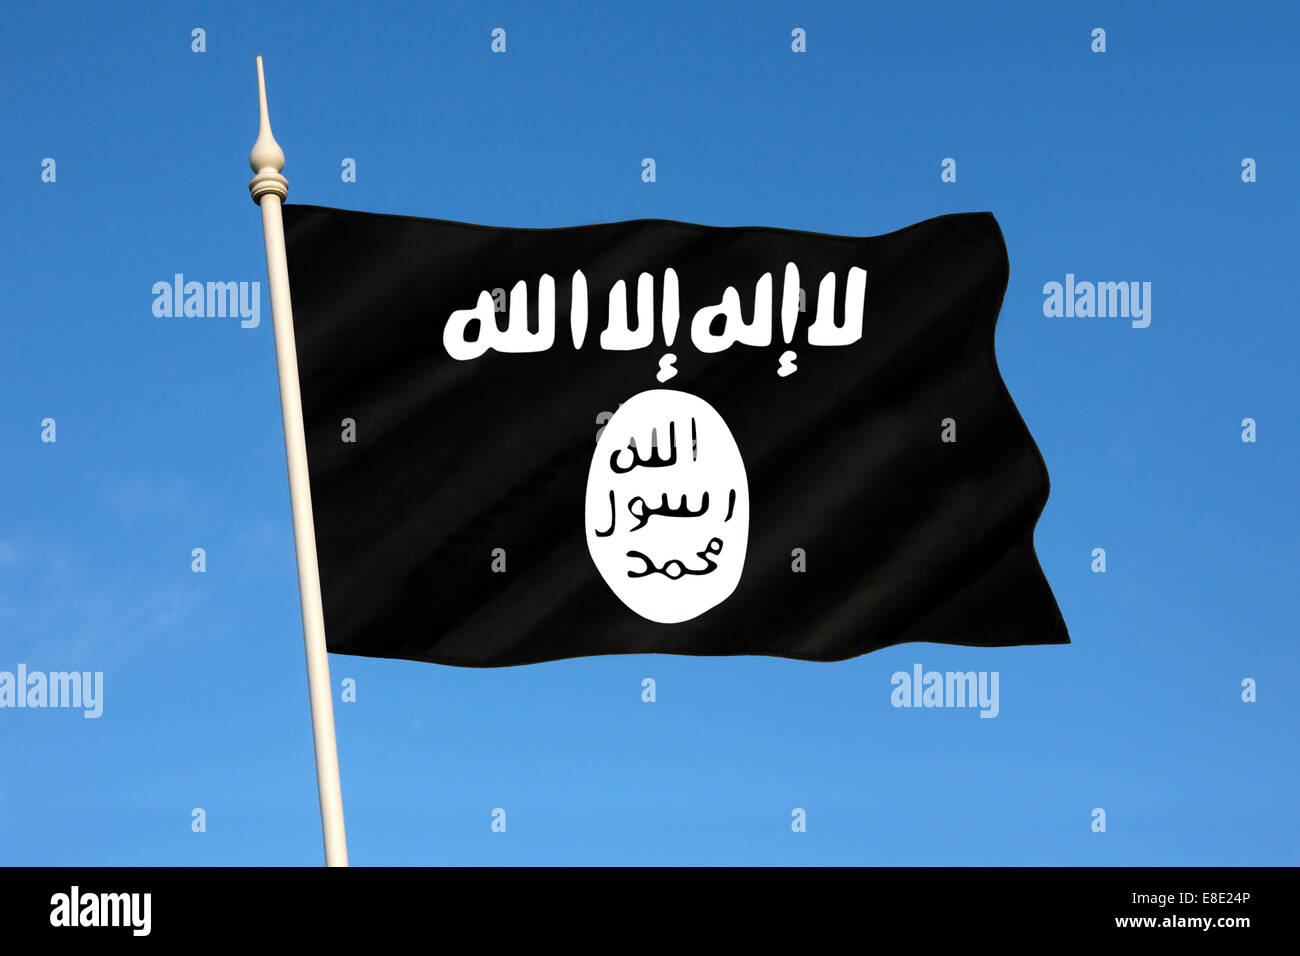 Flagge des islamischen Staates (ISIS oder ISIL) Stockfoto